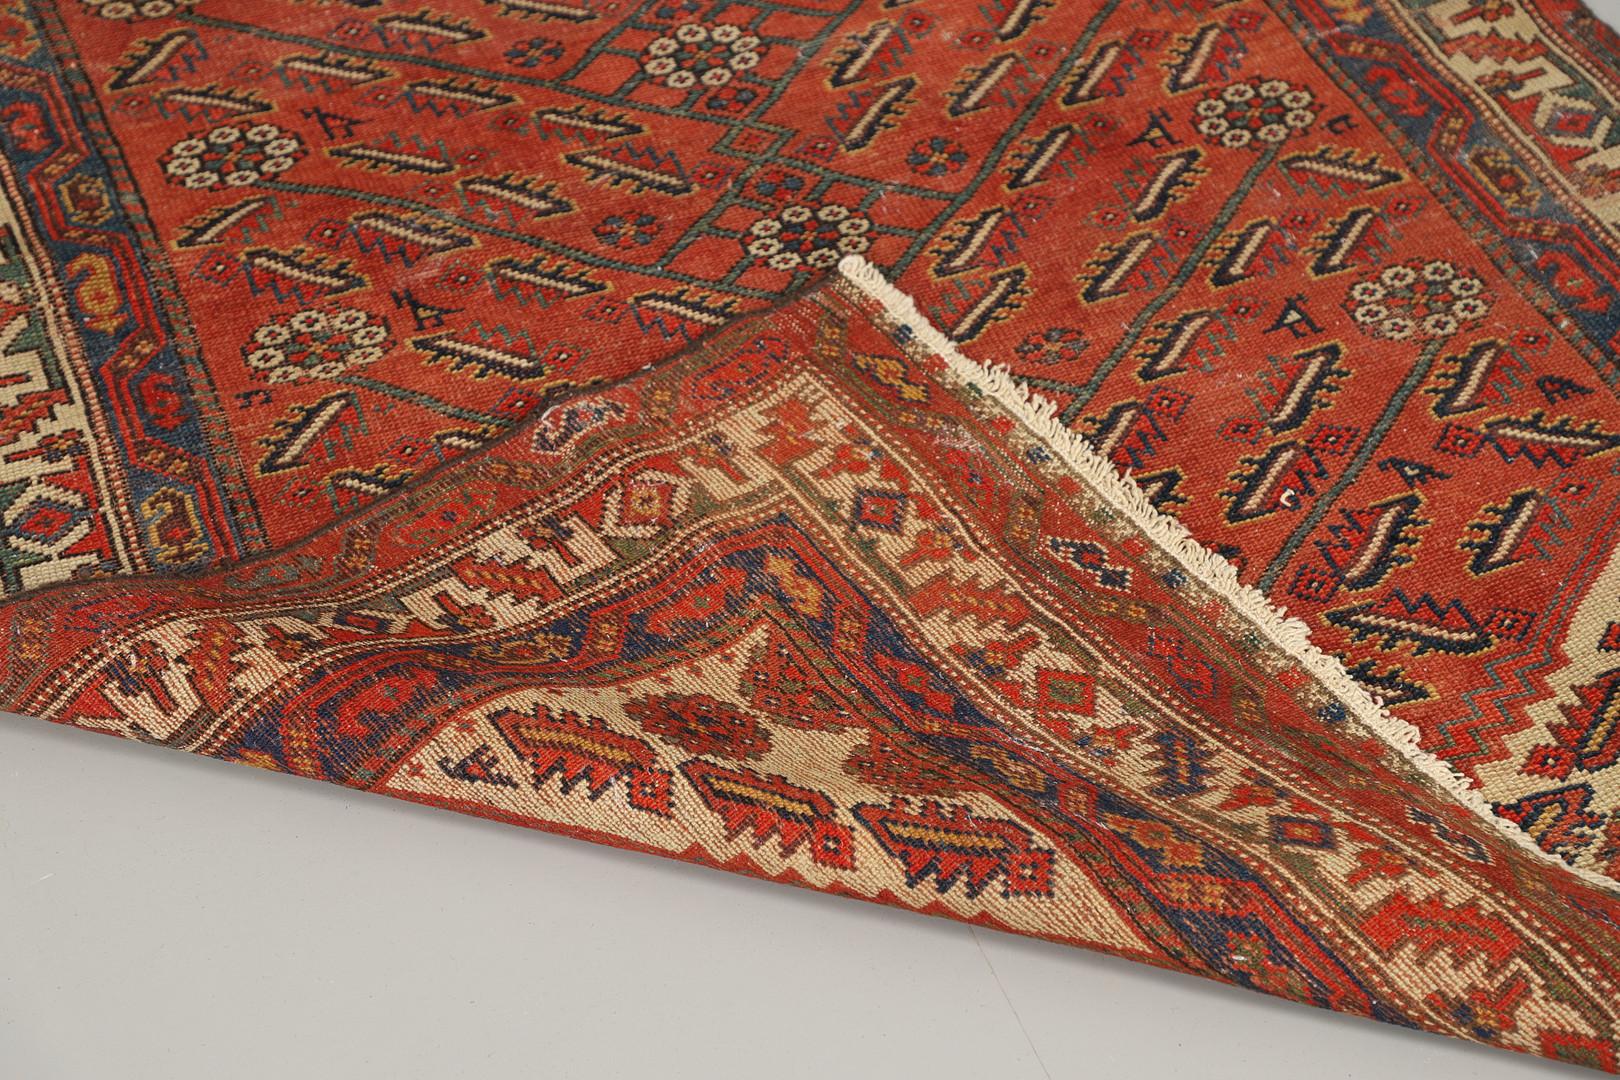 An excellent example of traditional Caucasian carpet rug weaving from the Shirvan region. These all-over-ground design patterned rugs can be the best home decor objects to give warmth to the environment because this woven rug has a great range of